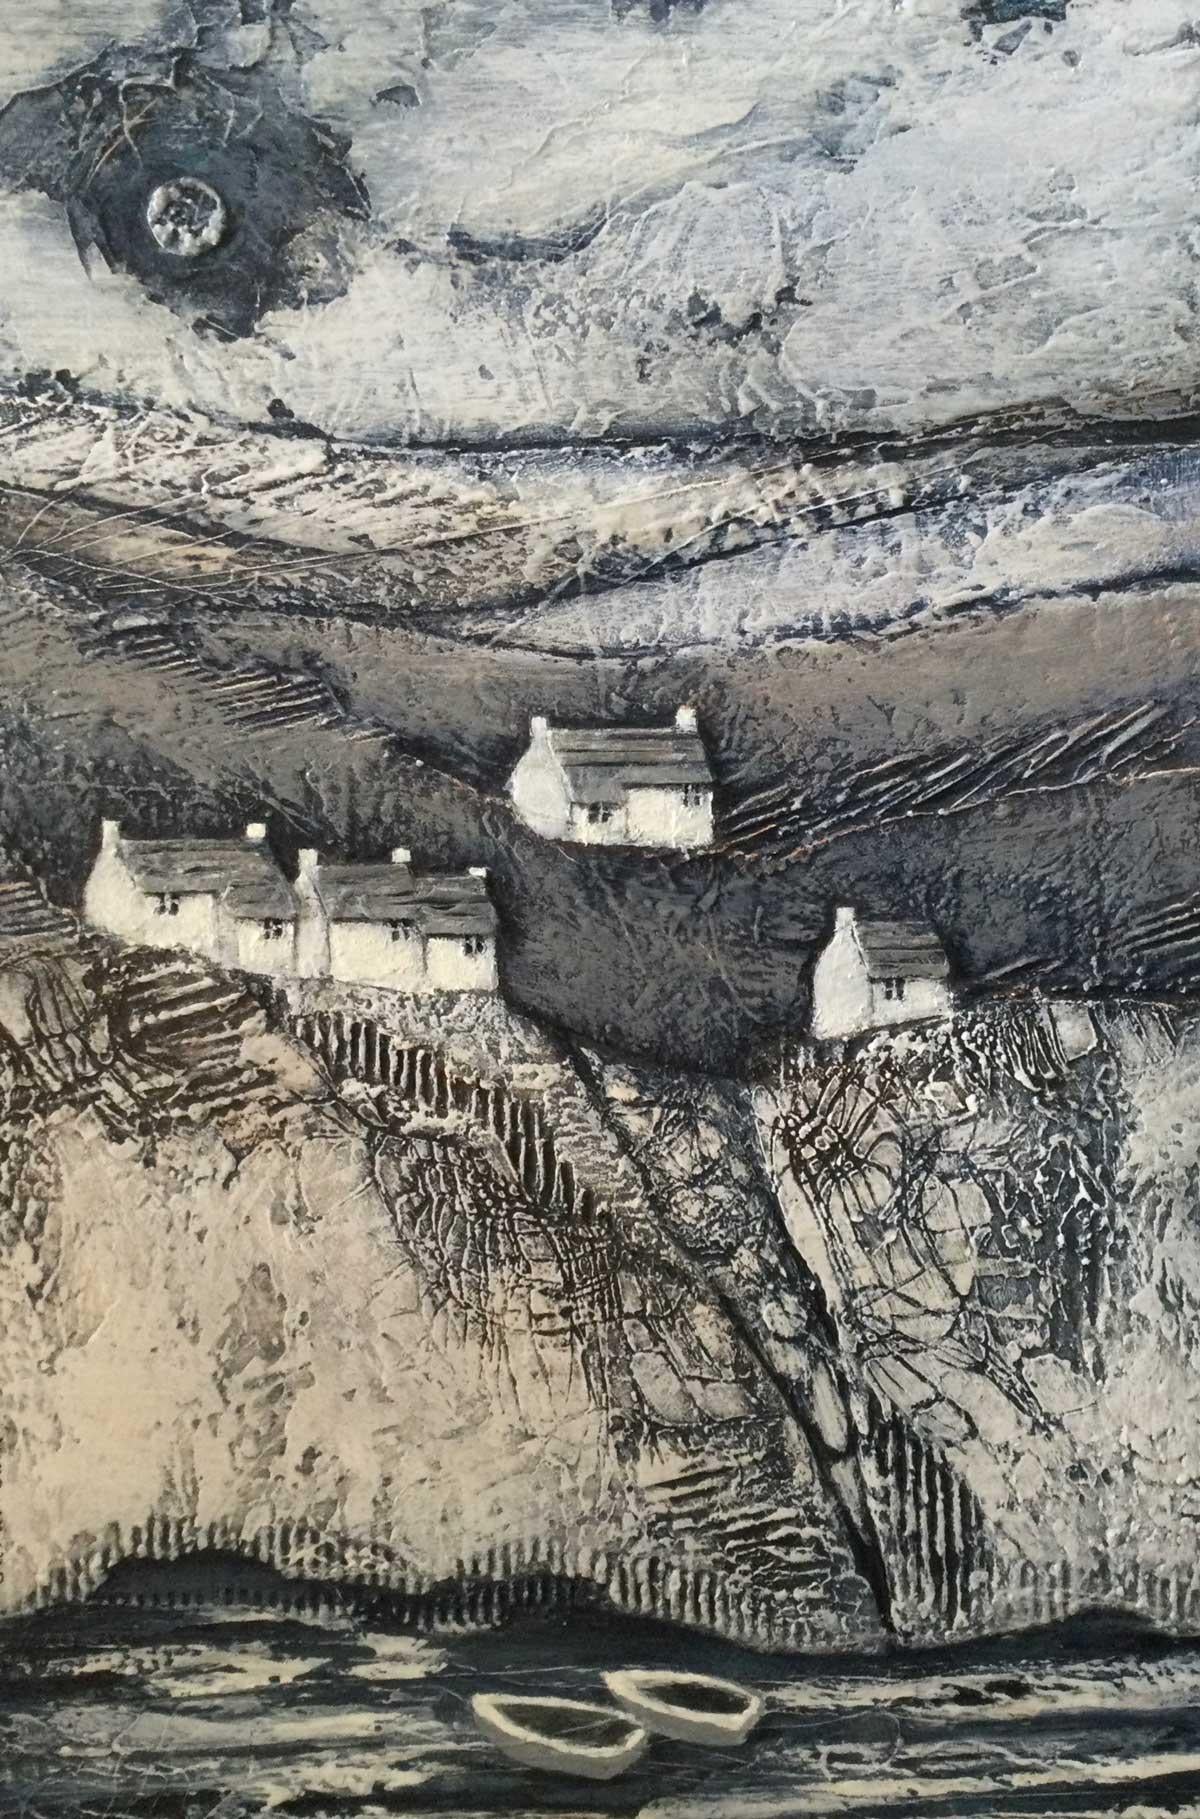 Down to the Sea - Brooding British Landscape / Framed Mixed Media - Mixed Media Art by Sarah Jack